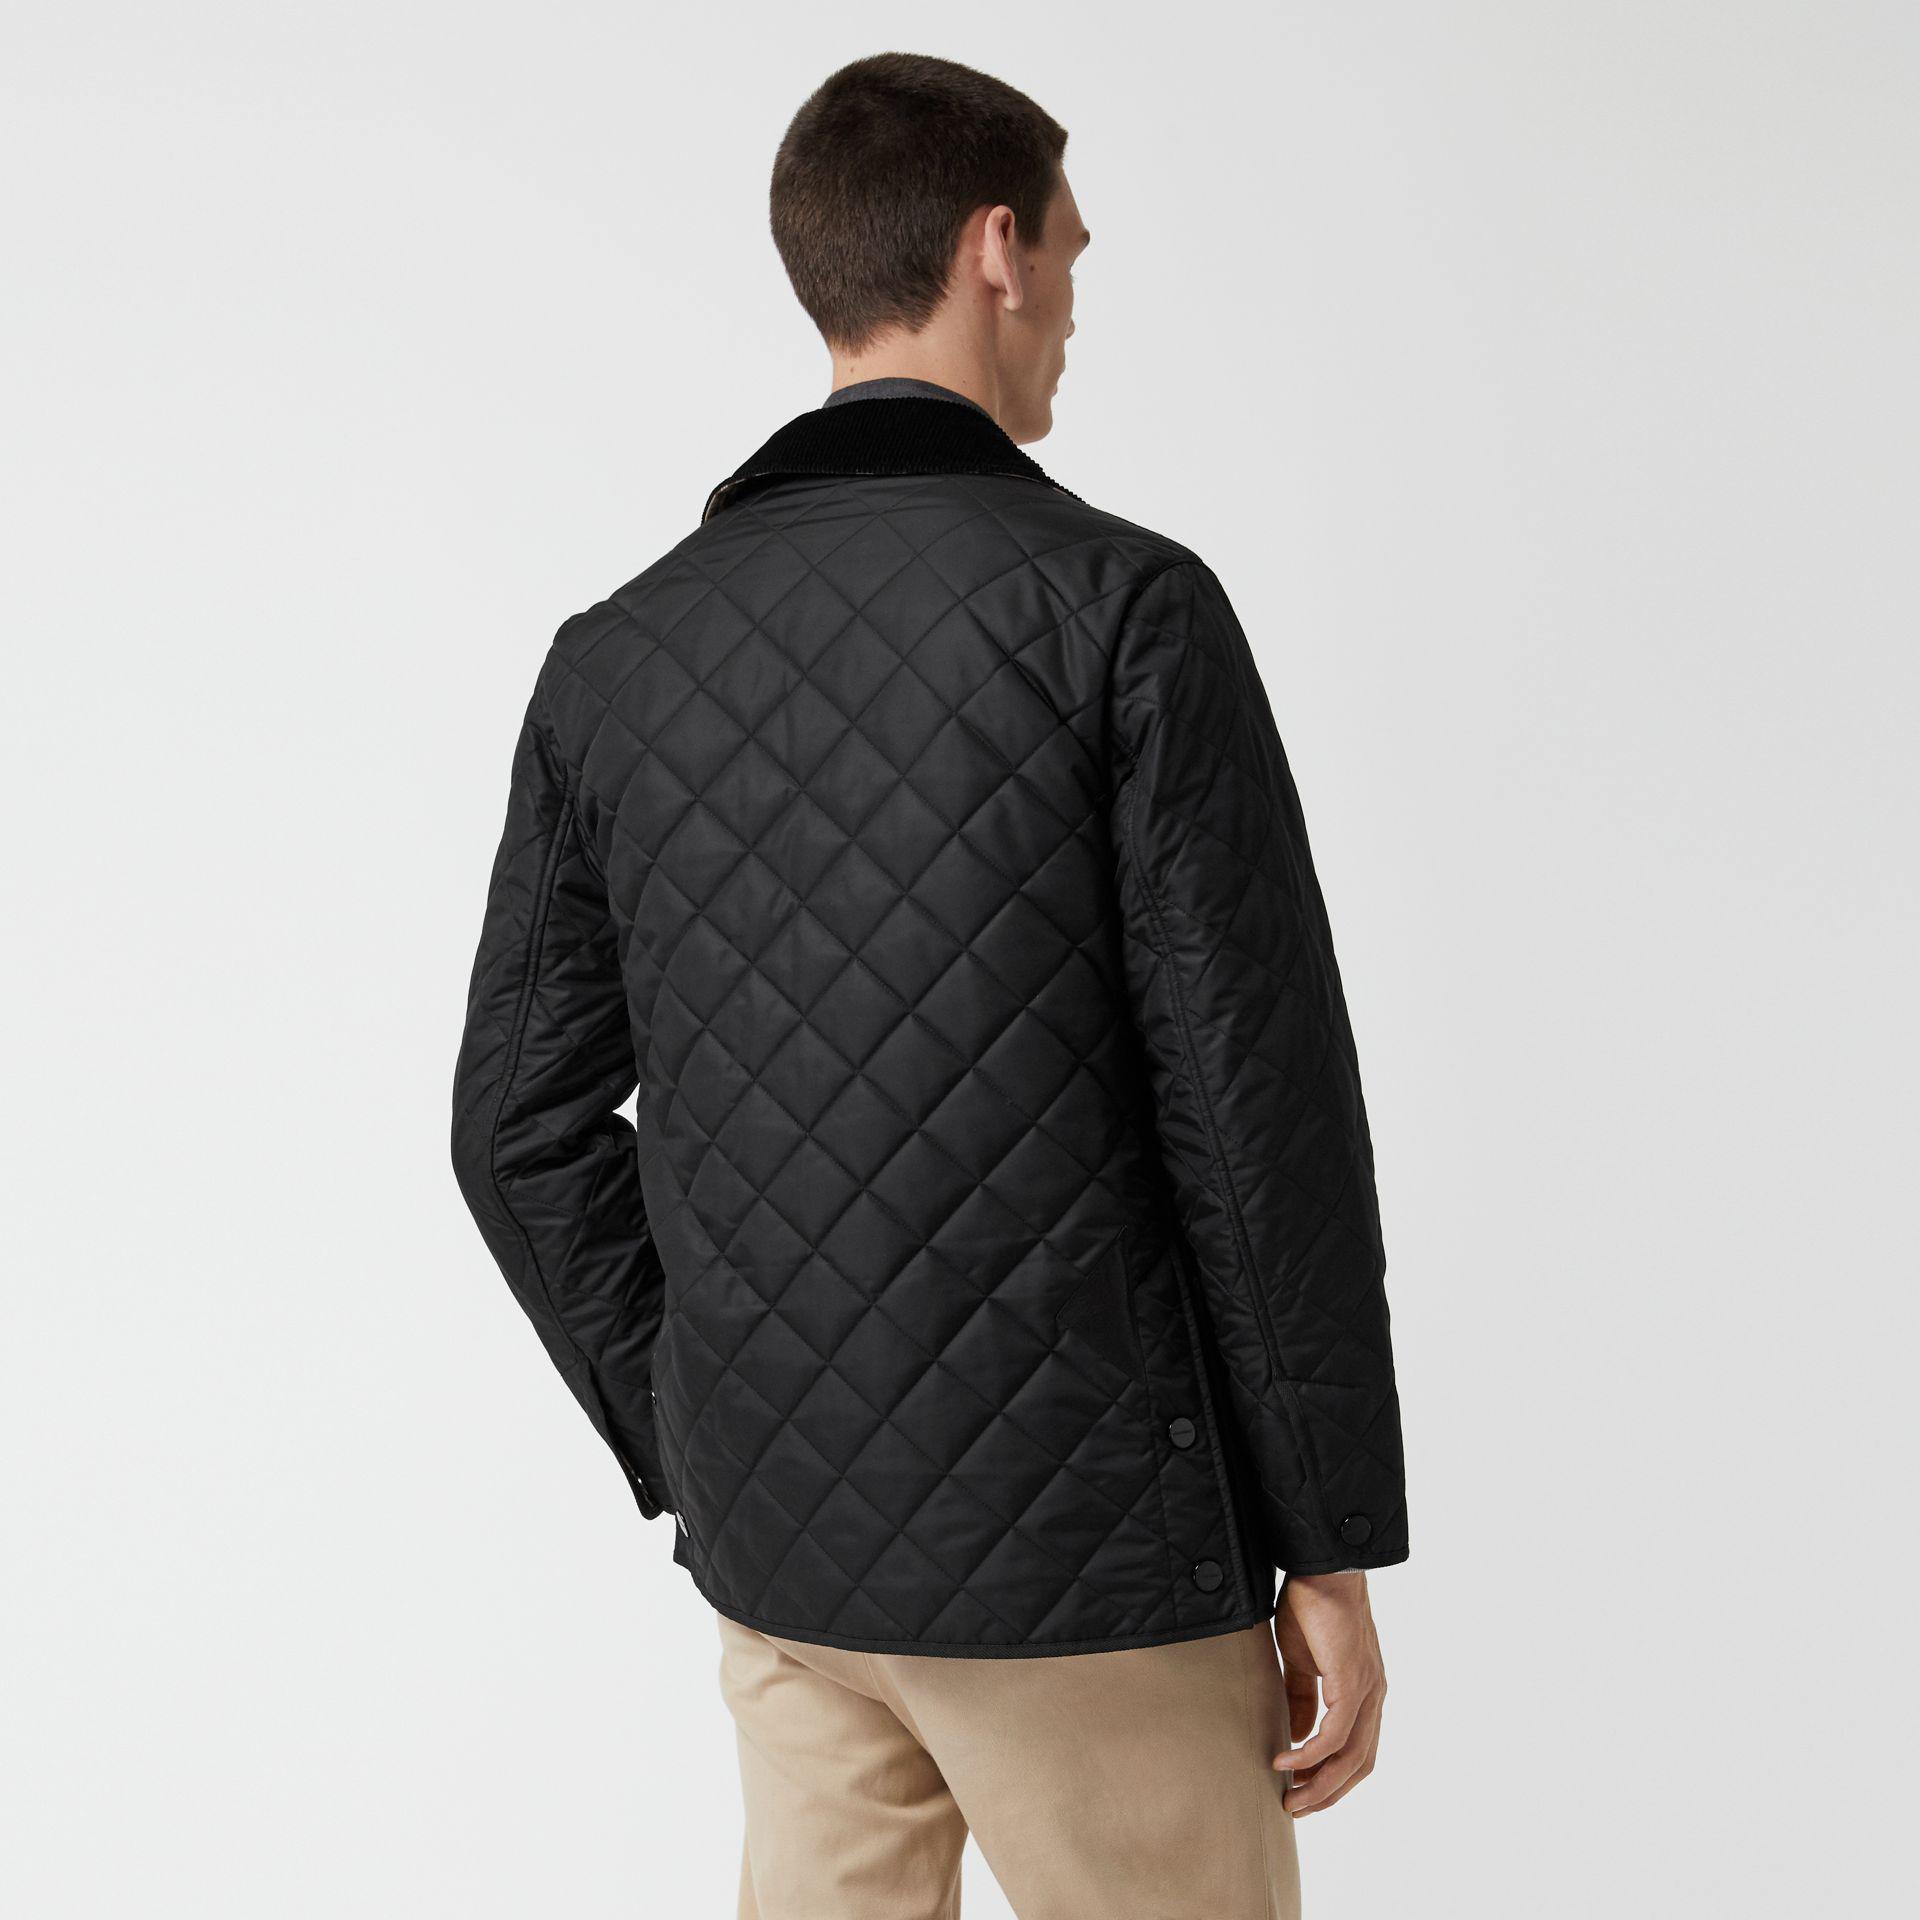 Burberry Corduroy Diamond Quilted Thermoregulated Barn Jacket in Black ...